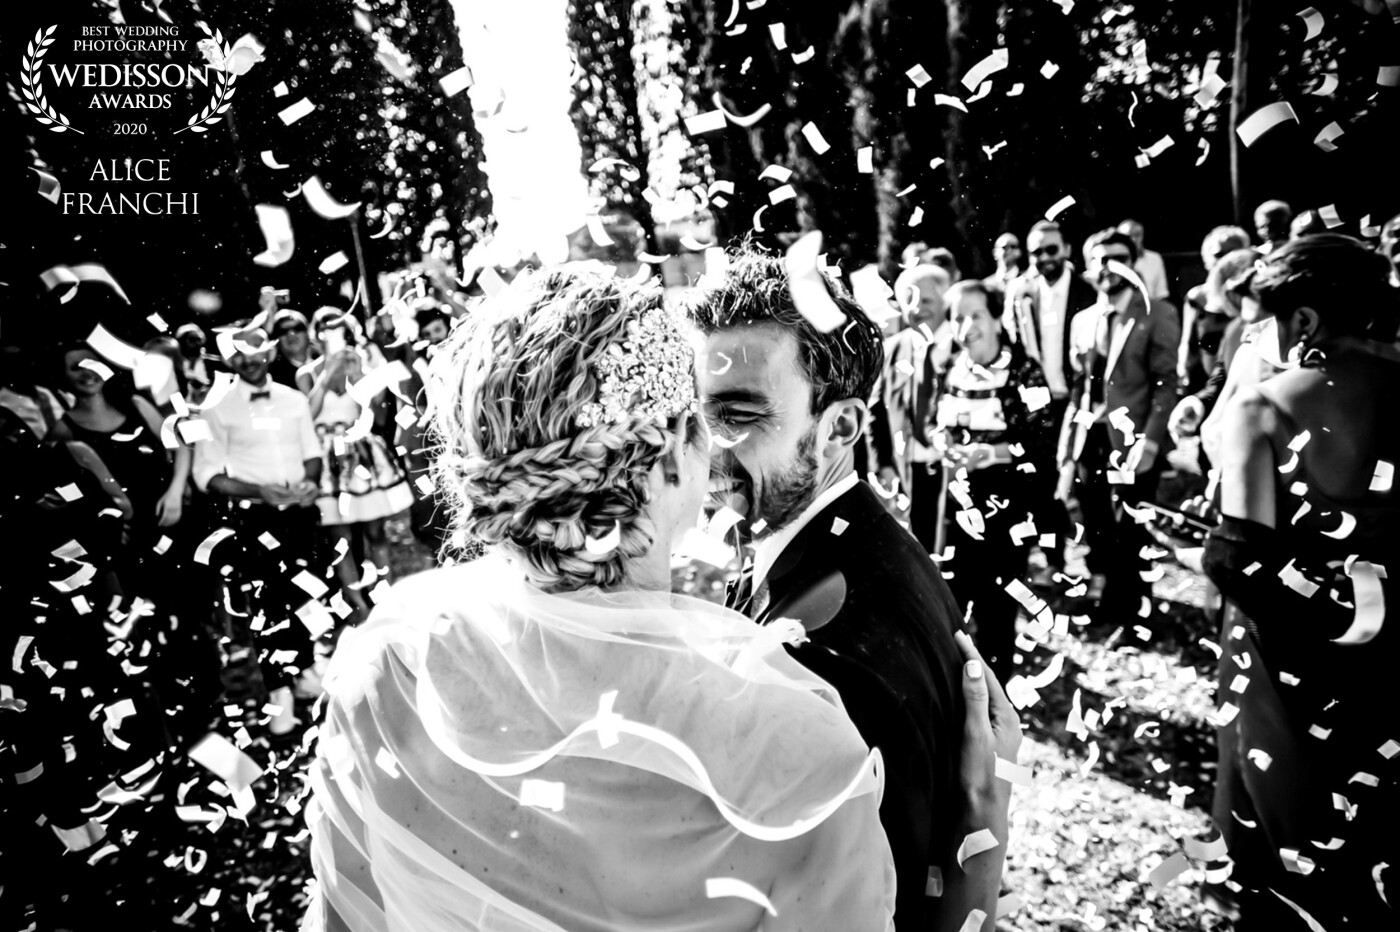 Confetti, to throw rice at weddings. A fun moment but also a wish for the couple. Good luck in their life together.